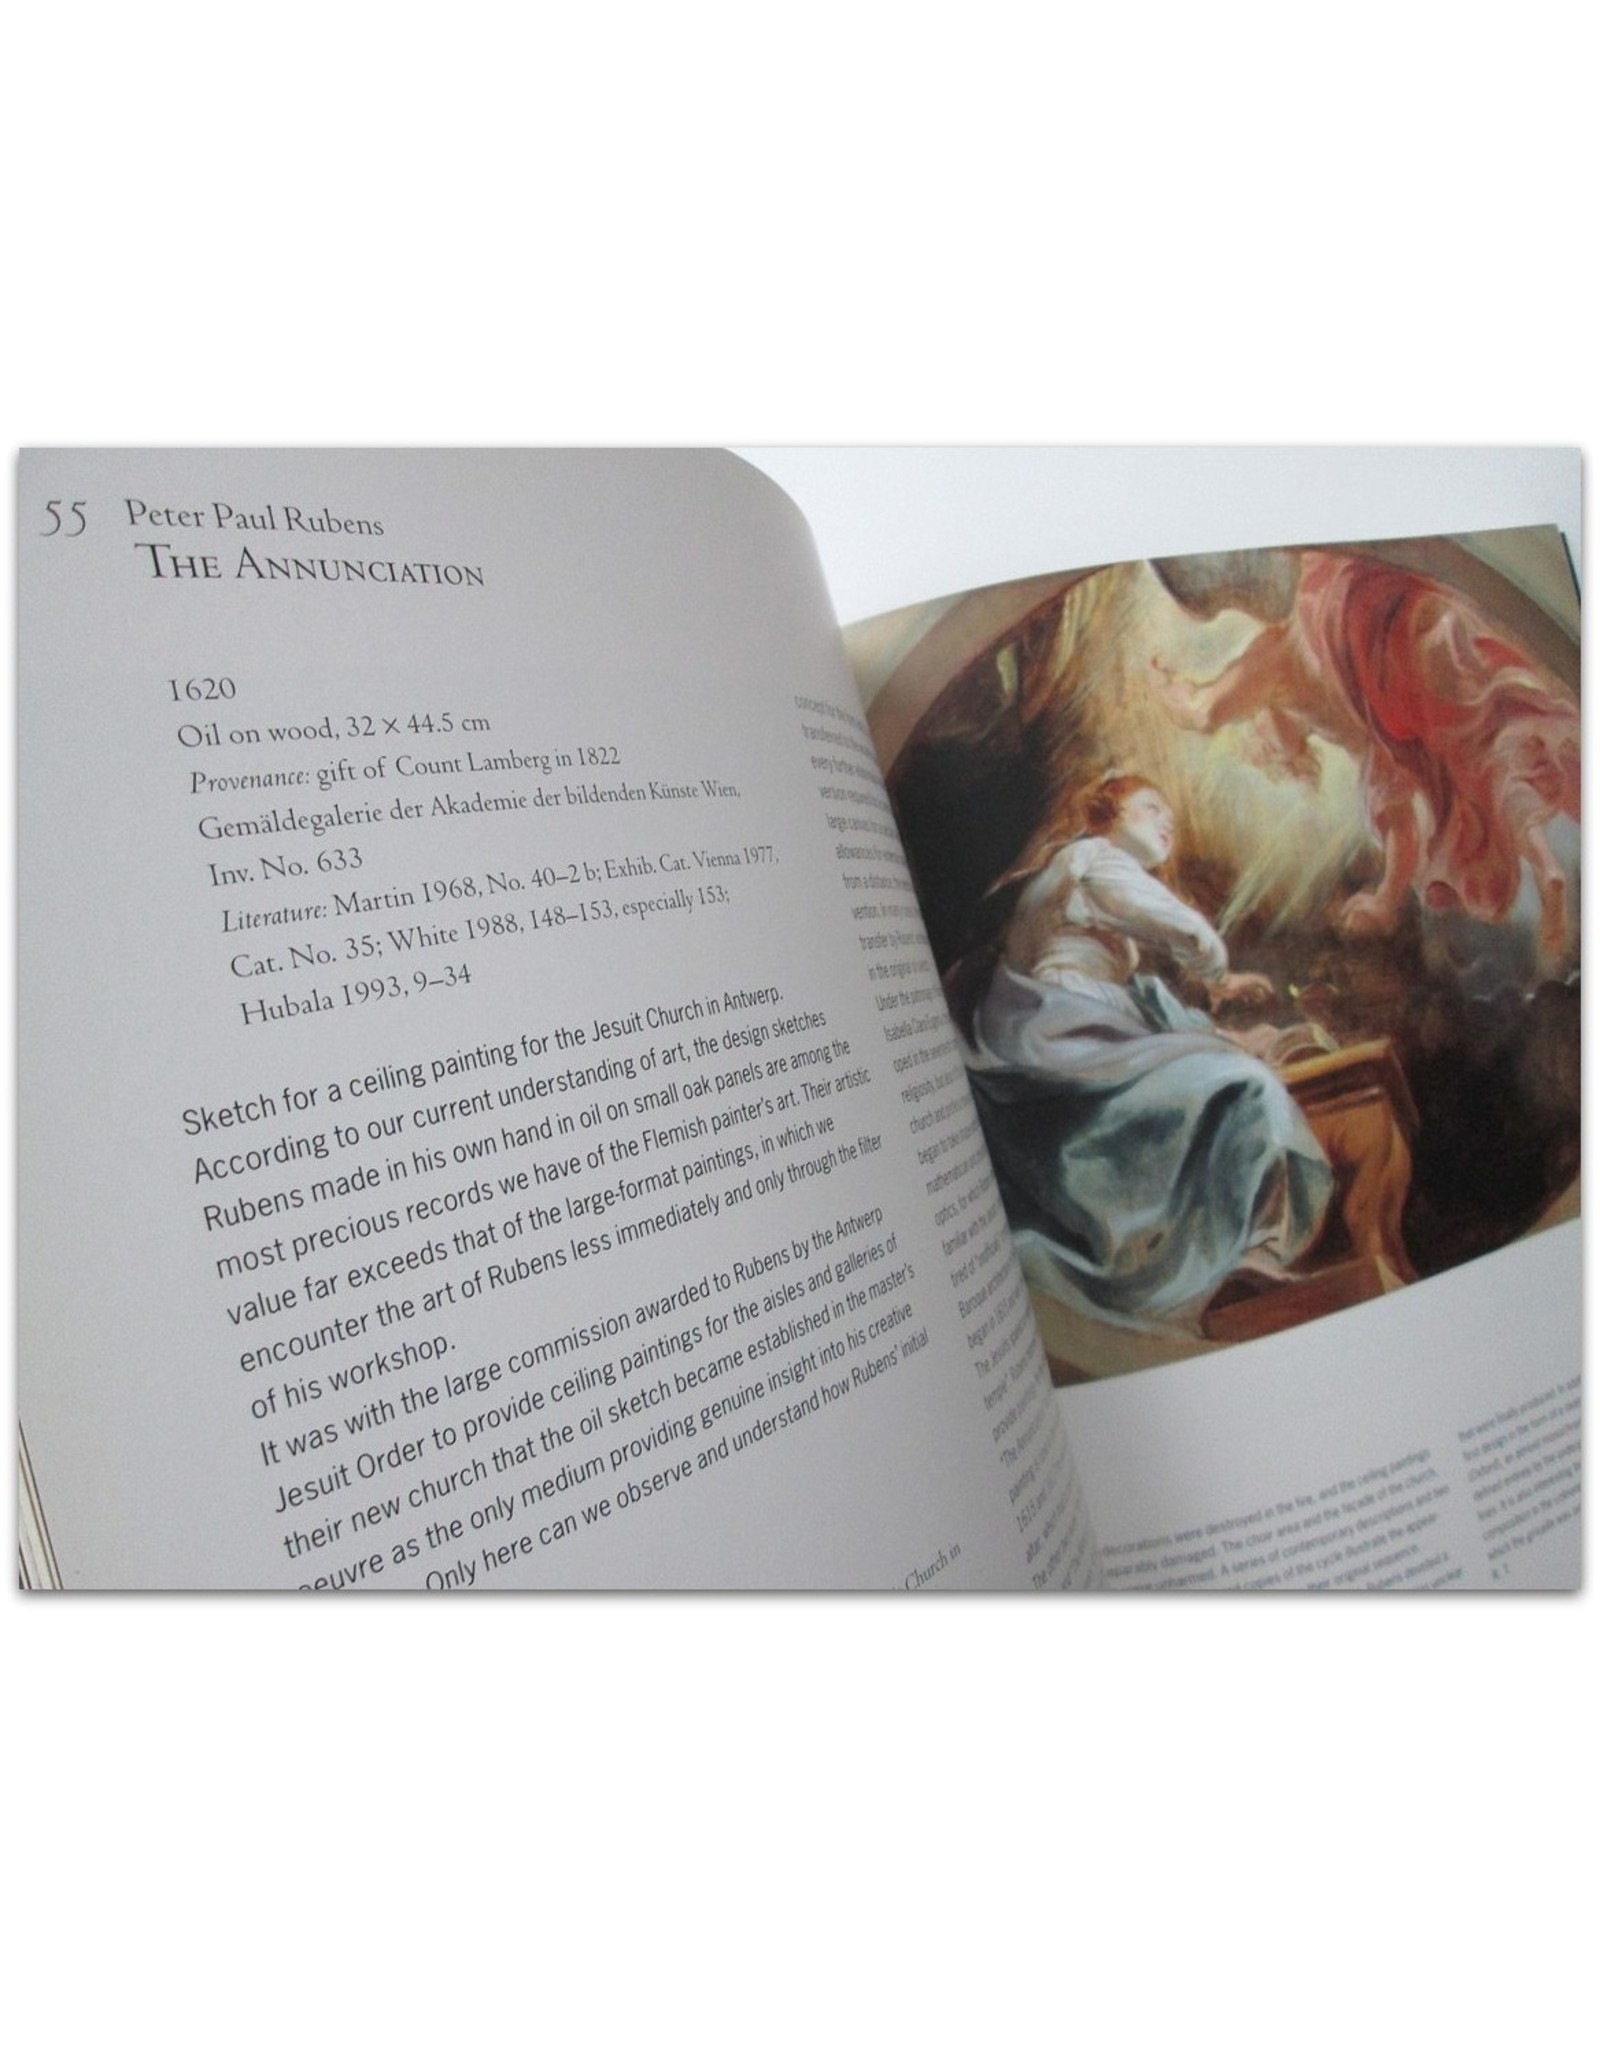 Johann Kräftner & Wilfried Seipel - Rubens in Vienna. The Masterpieces - The Pictures in the Collections of the Prince of Liechtenstein, [...]